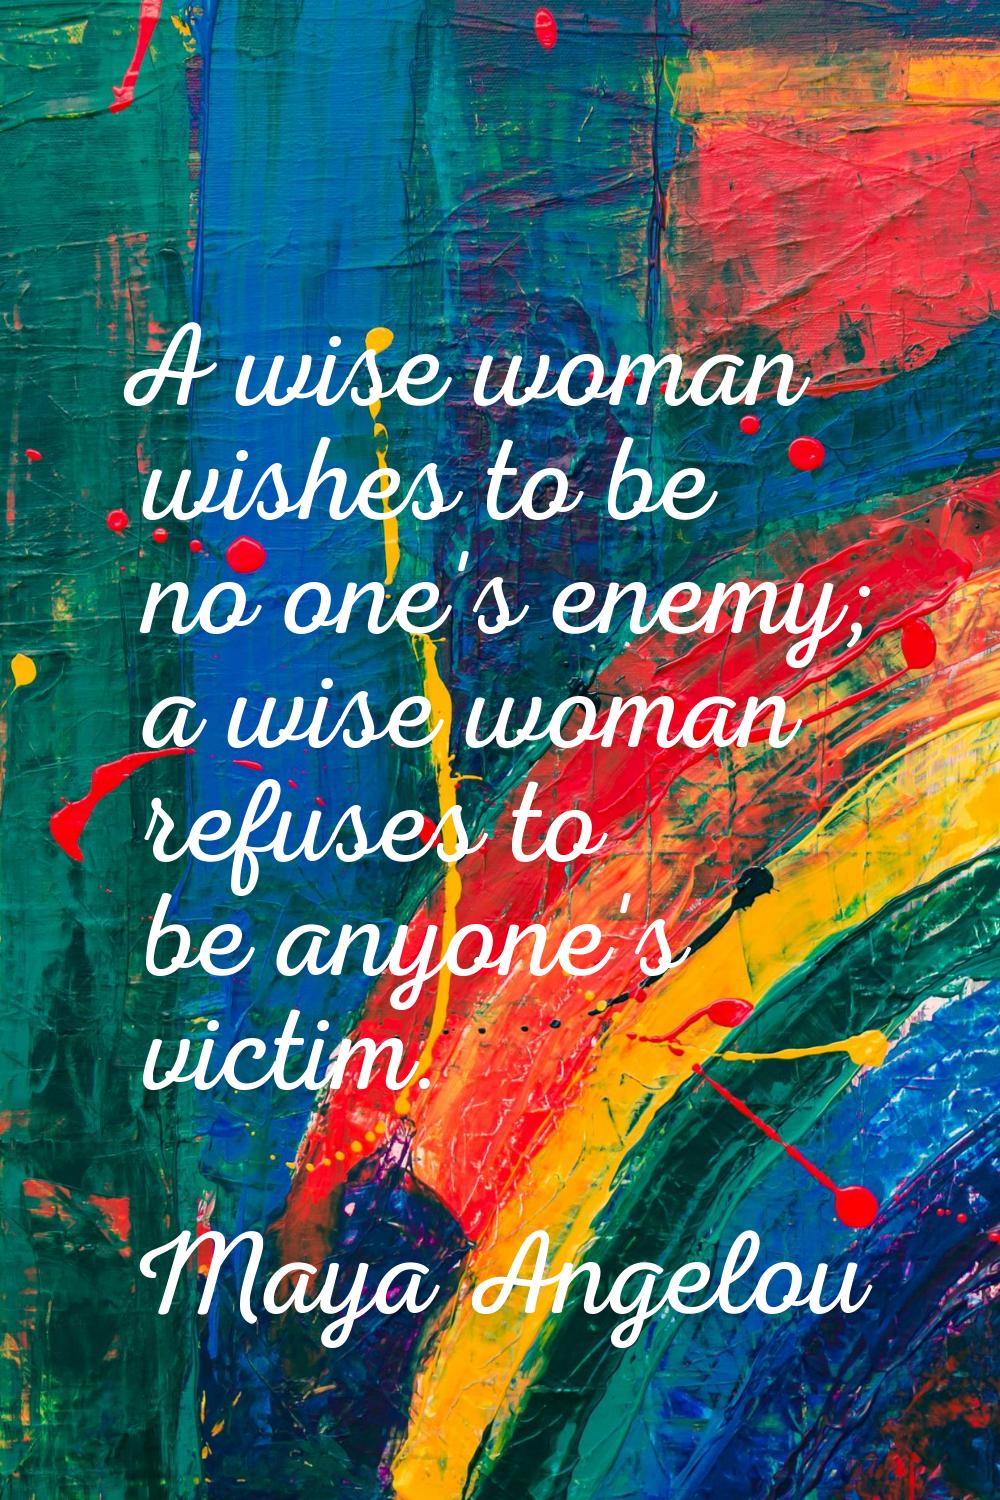 A wise woman wishes to be no one's enemy; a wise woman refuses to be anyone's victim.